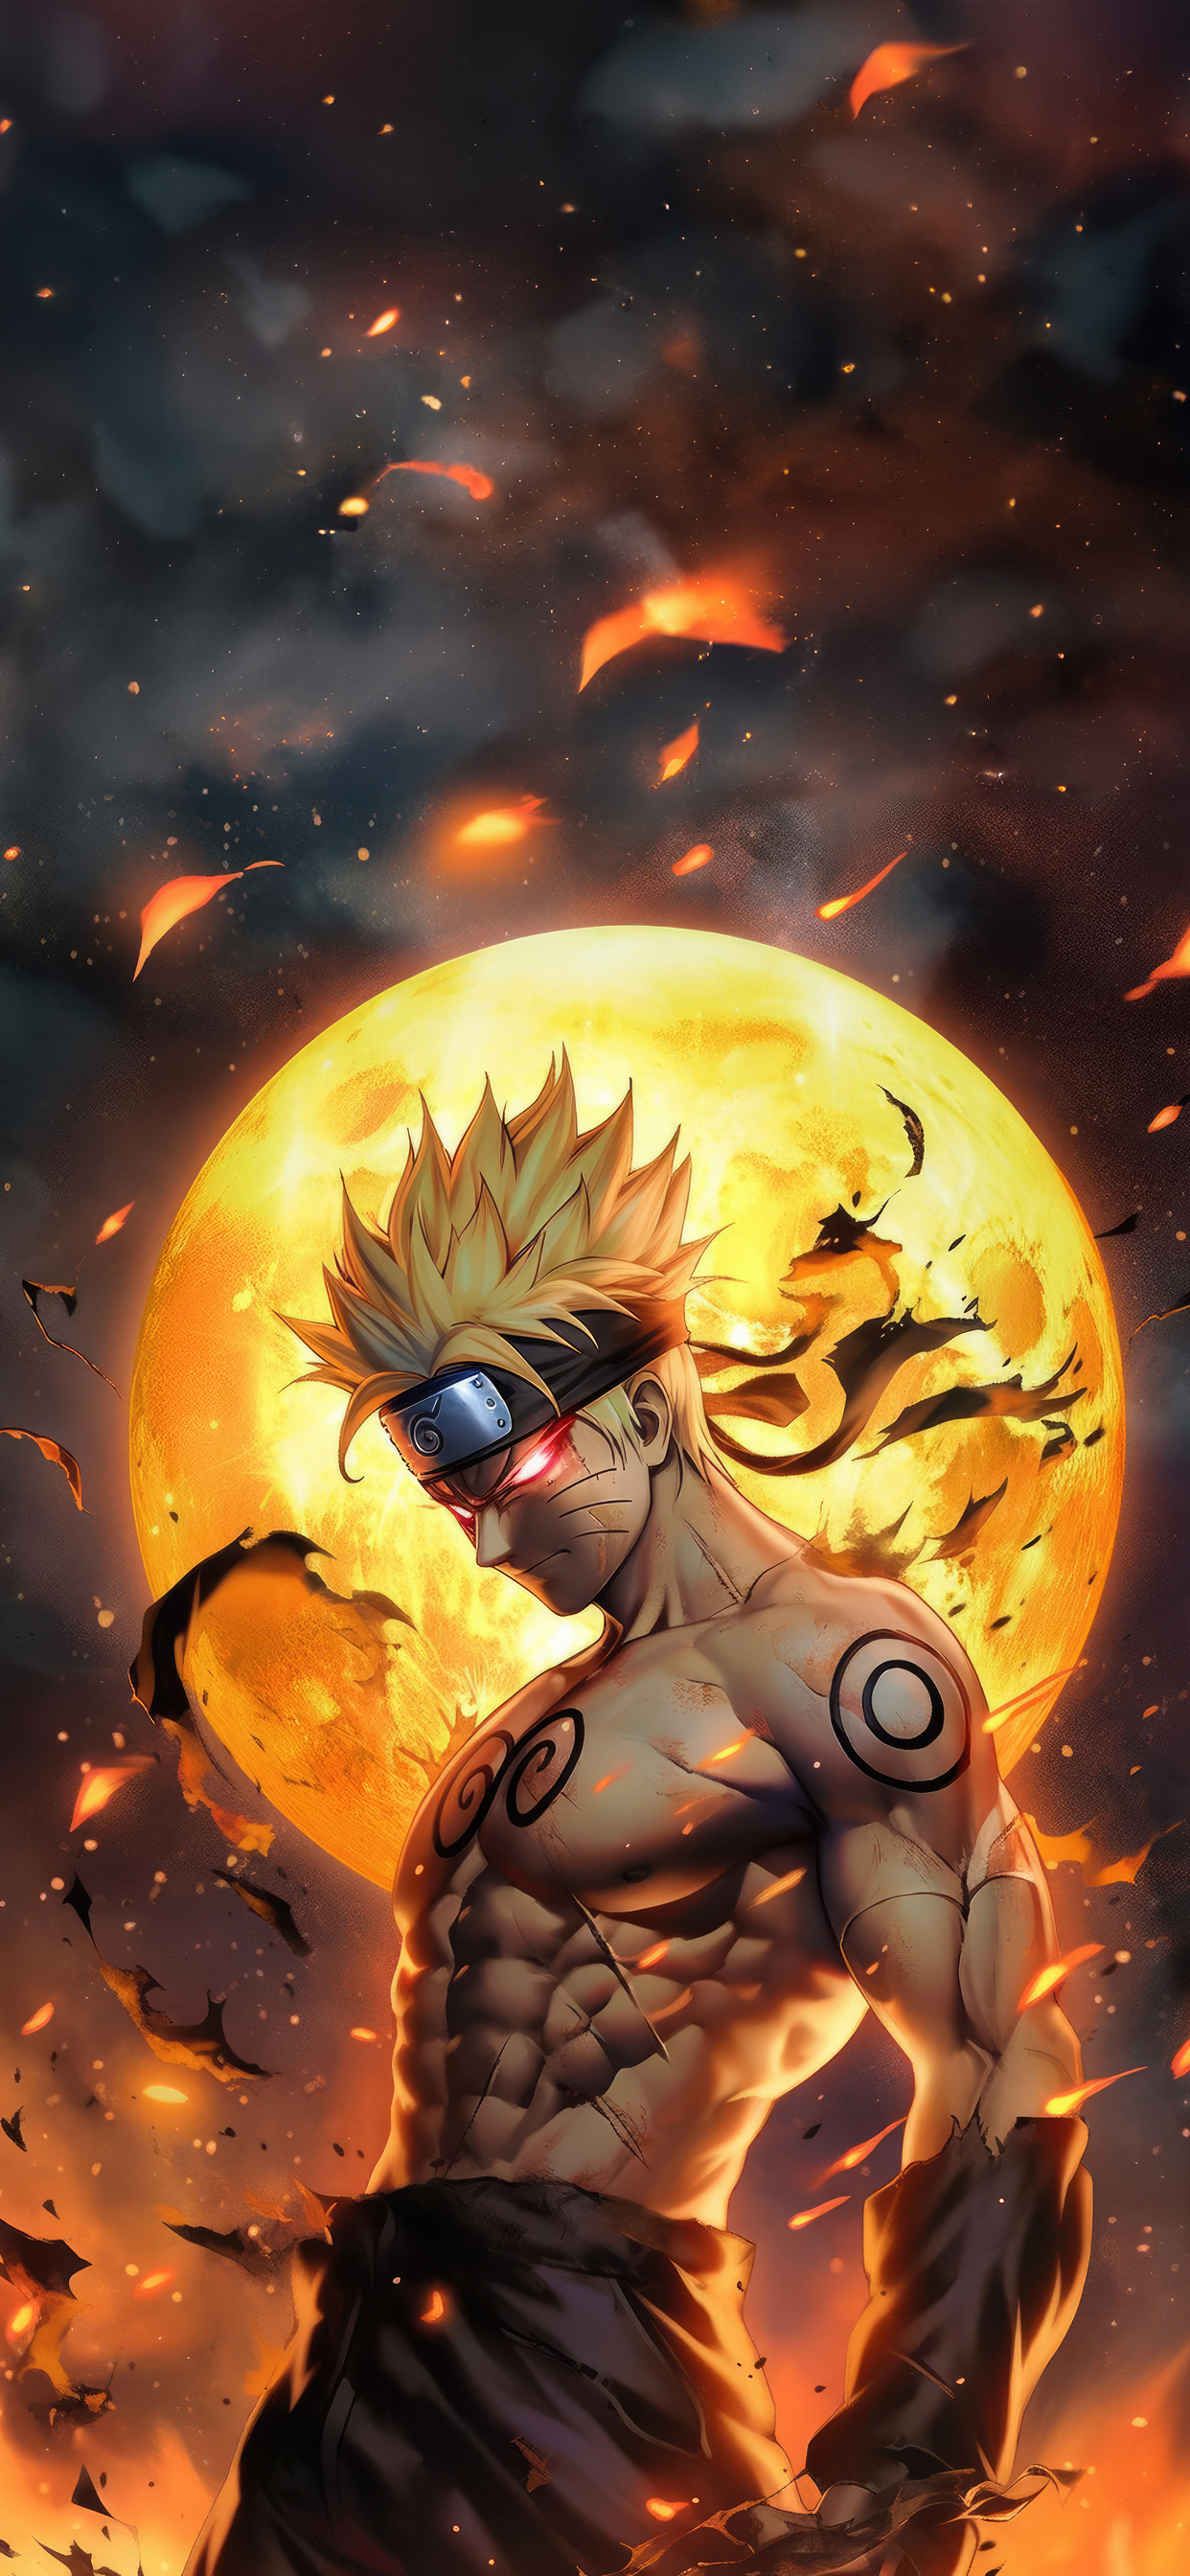 Naruto Iphone Wallpaper by MD3-Designs on DeviantArt